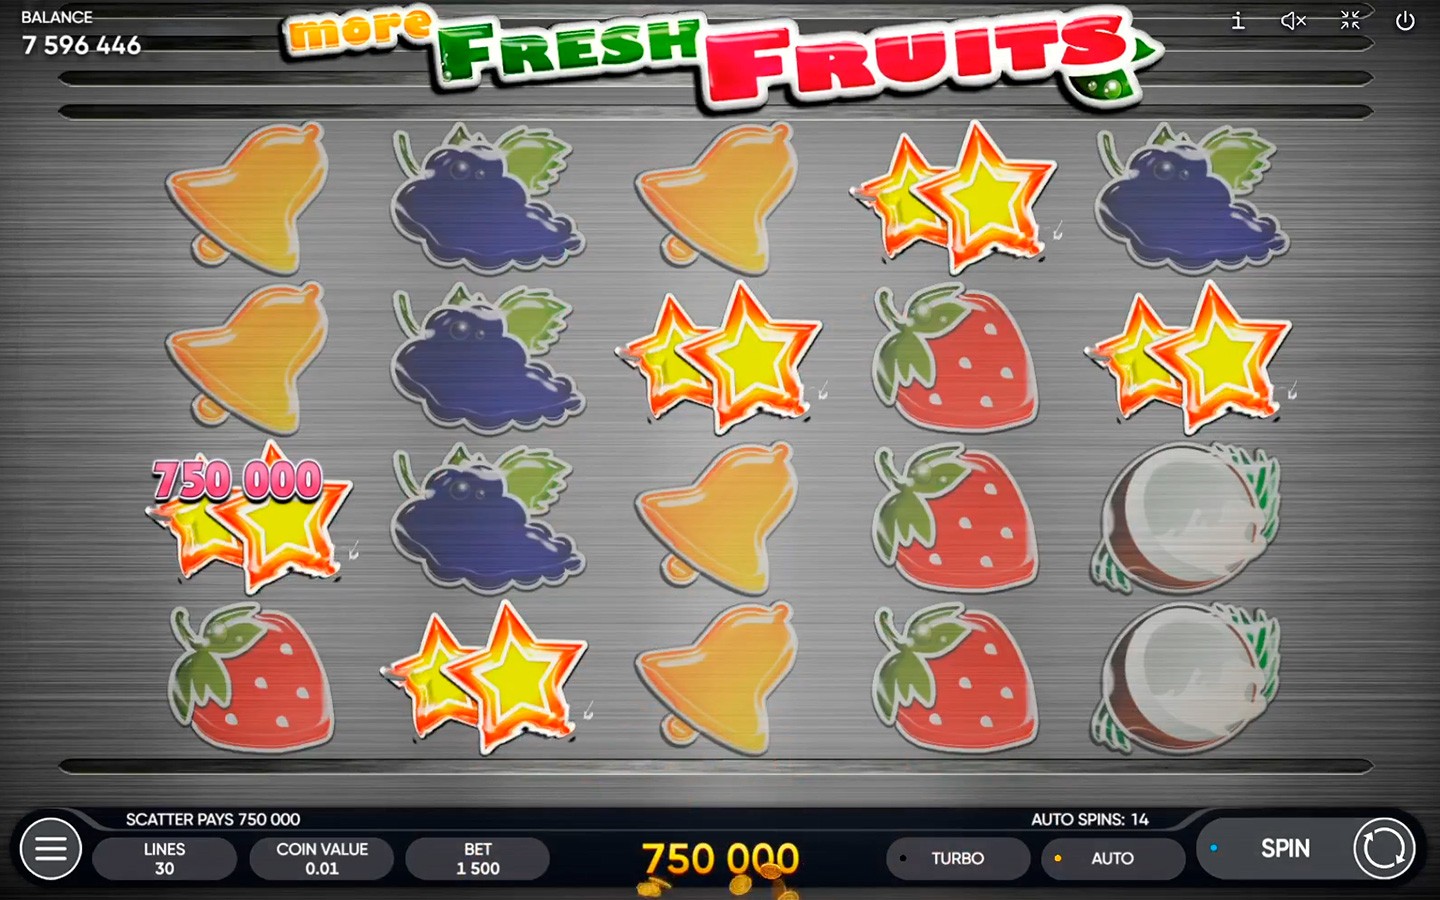 Play More Fresh Fruits slot by top casino game developer!